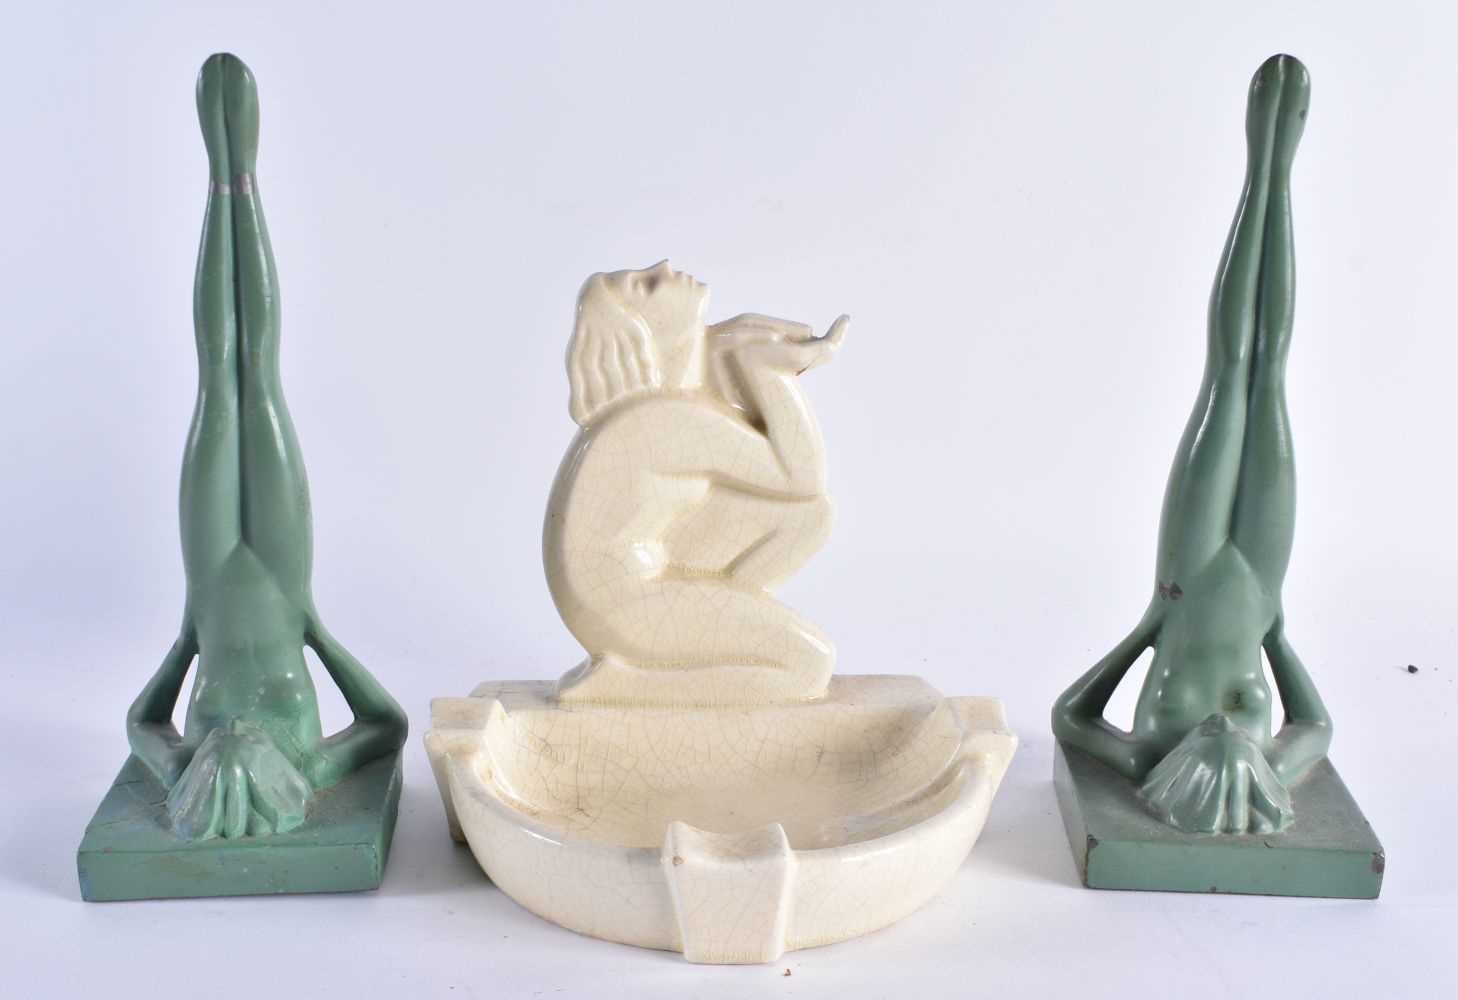 AN ART DECO FRENCH POTTERY FIGURAL ASHTRAY together with a pair of heavy painted art deco figural